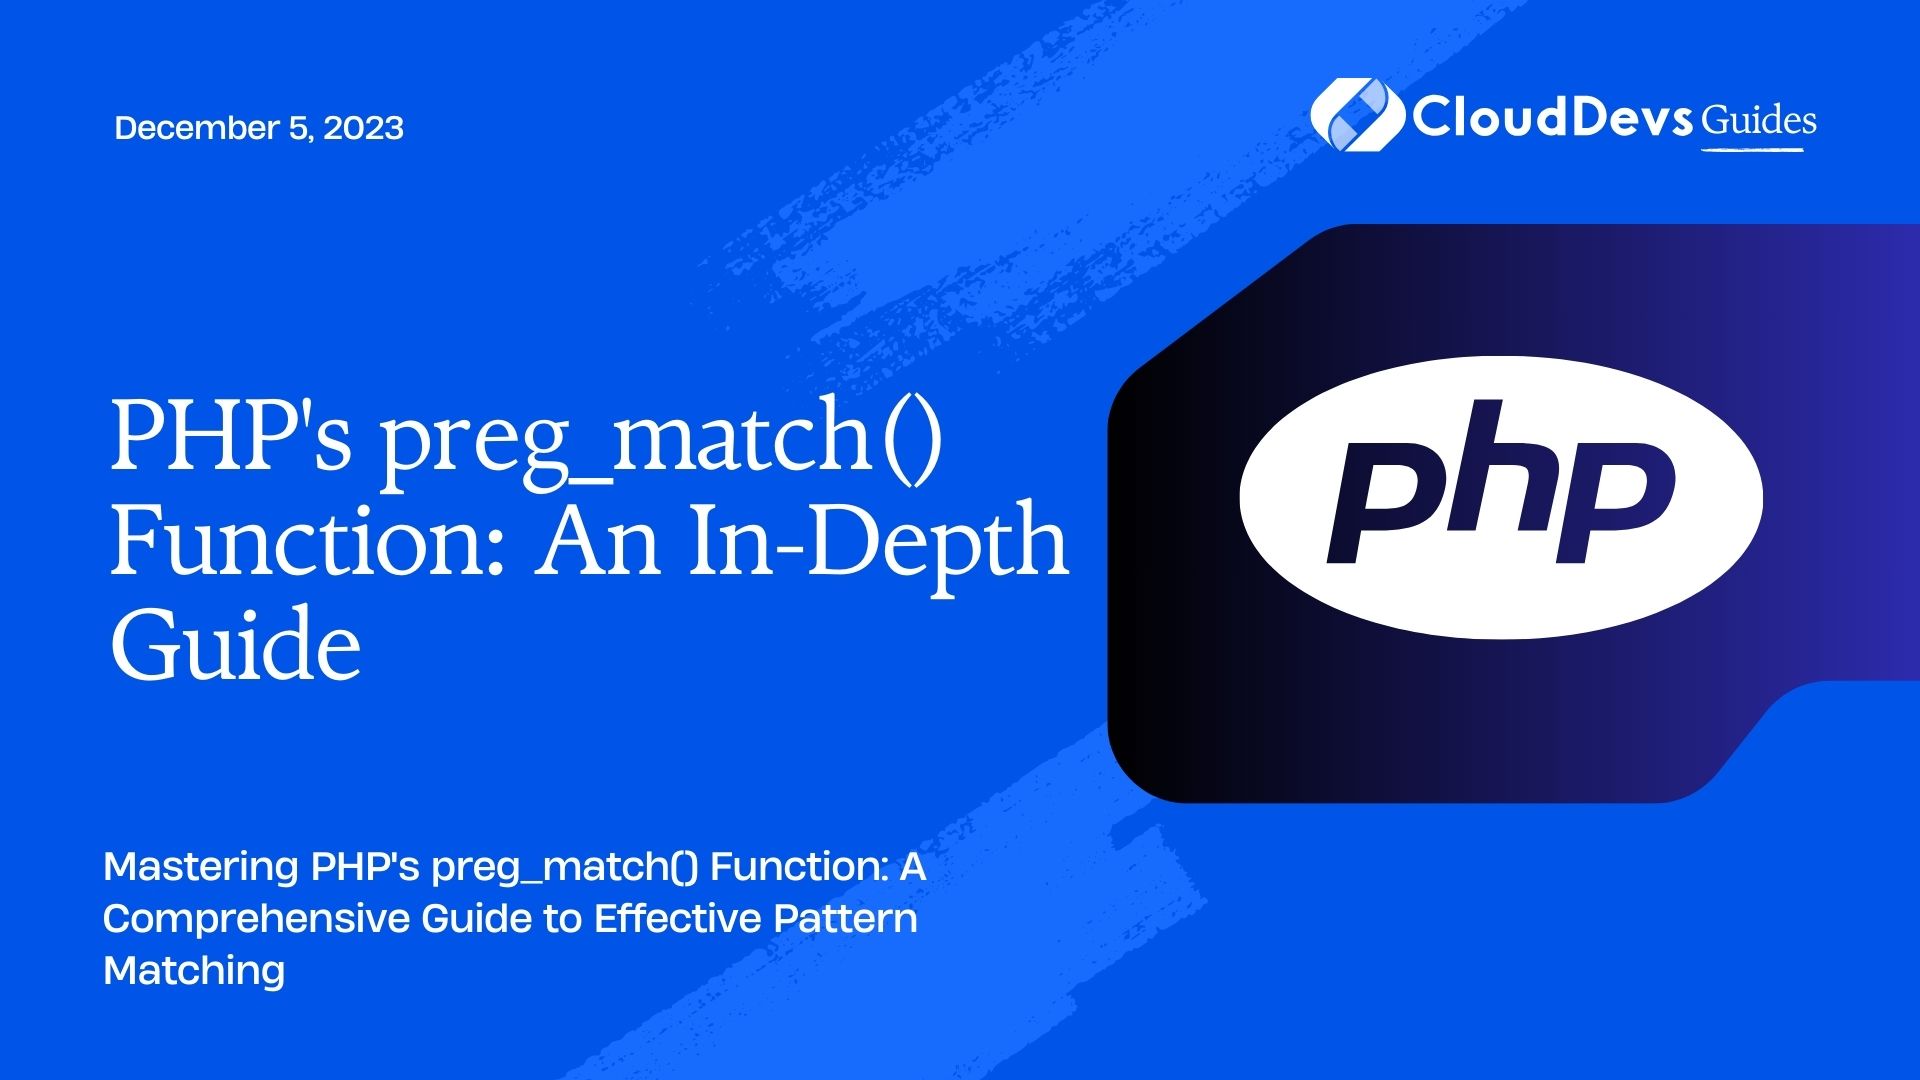 PHP's preg_match() Function: An In-Depth Guide